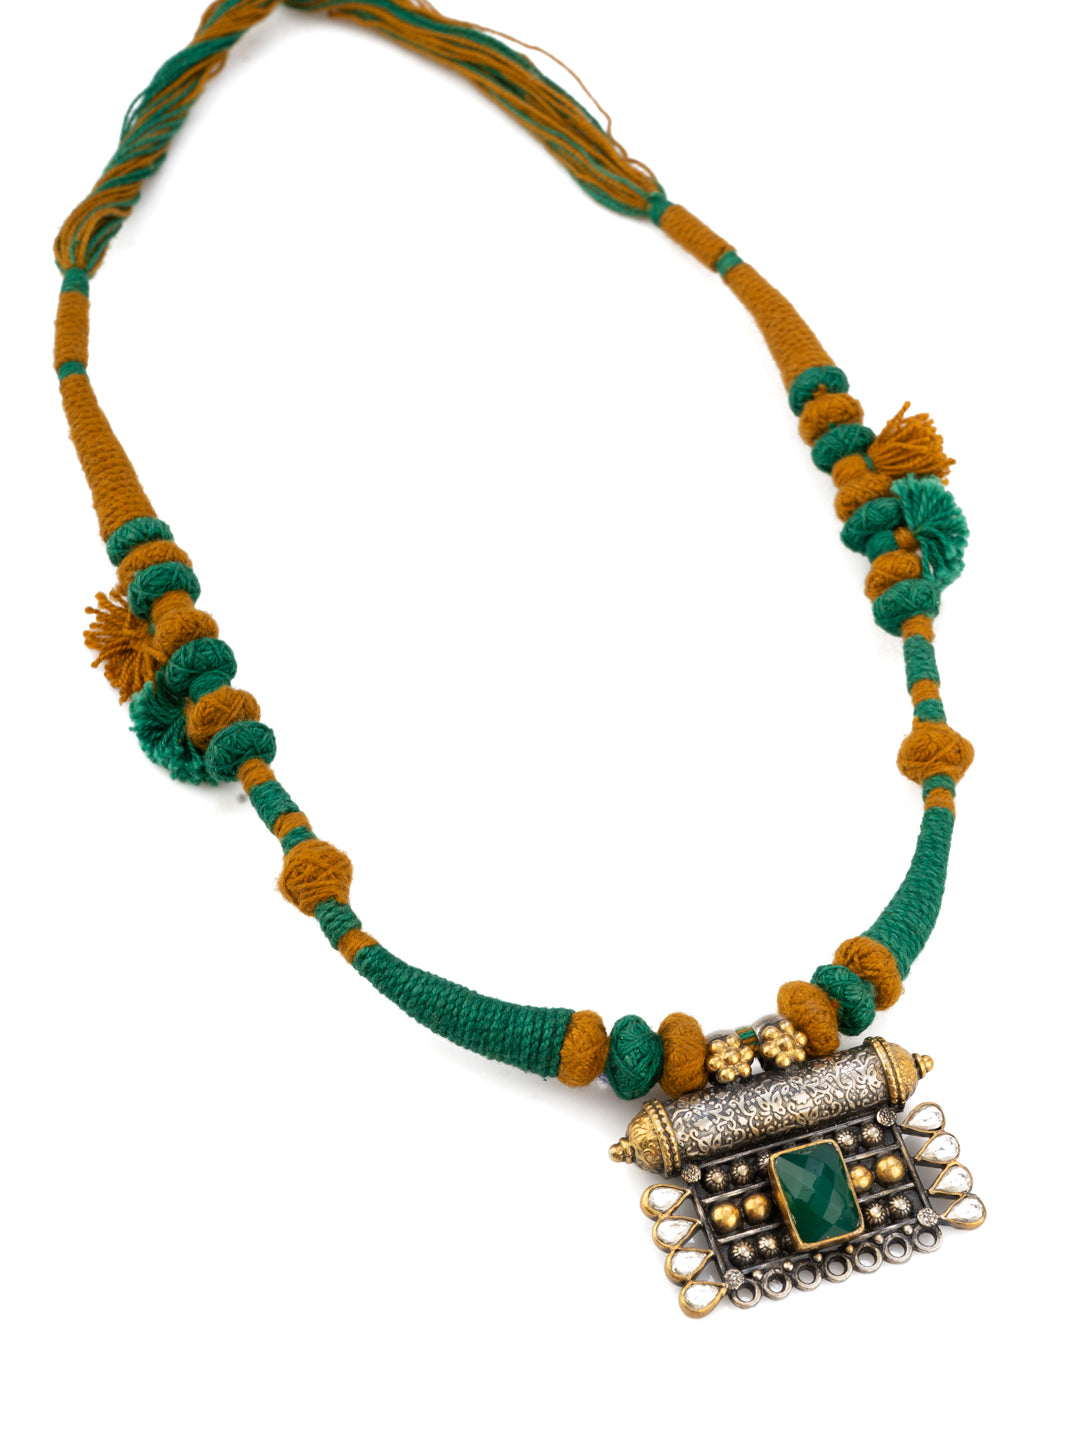 Dual Tone Green Onyx Textured Pendant Necklace with Adjustable Patwa Thread